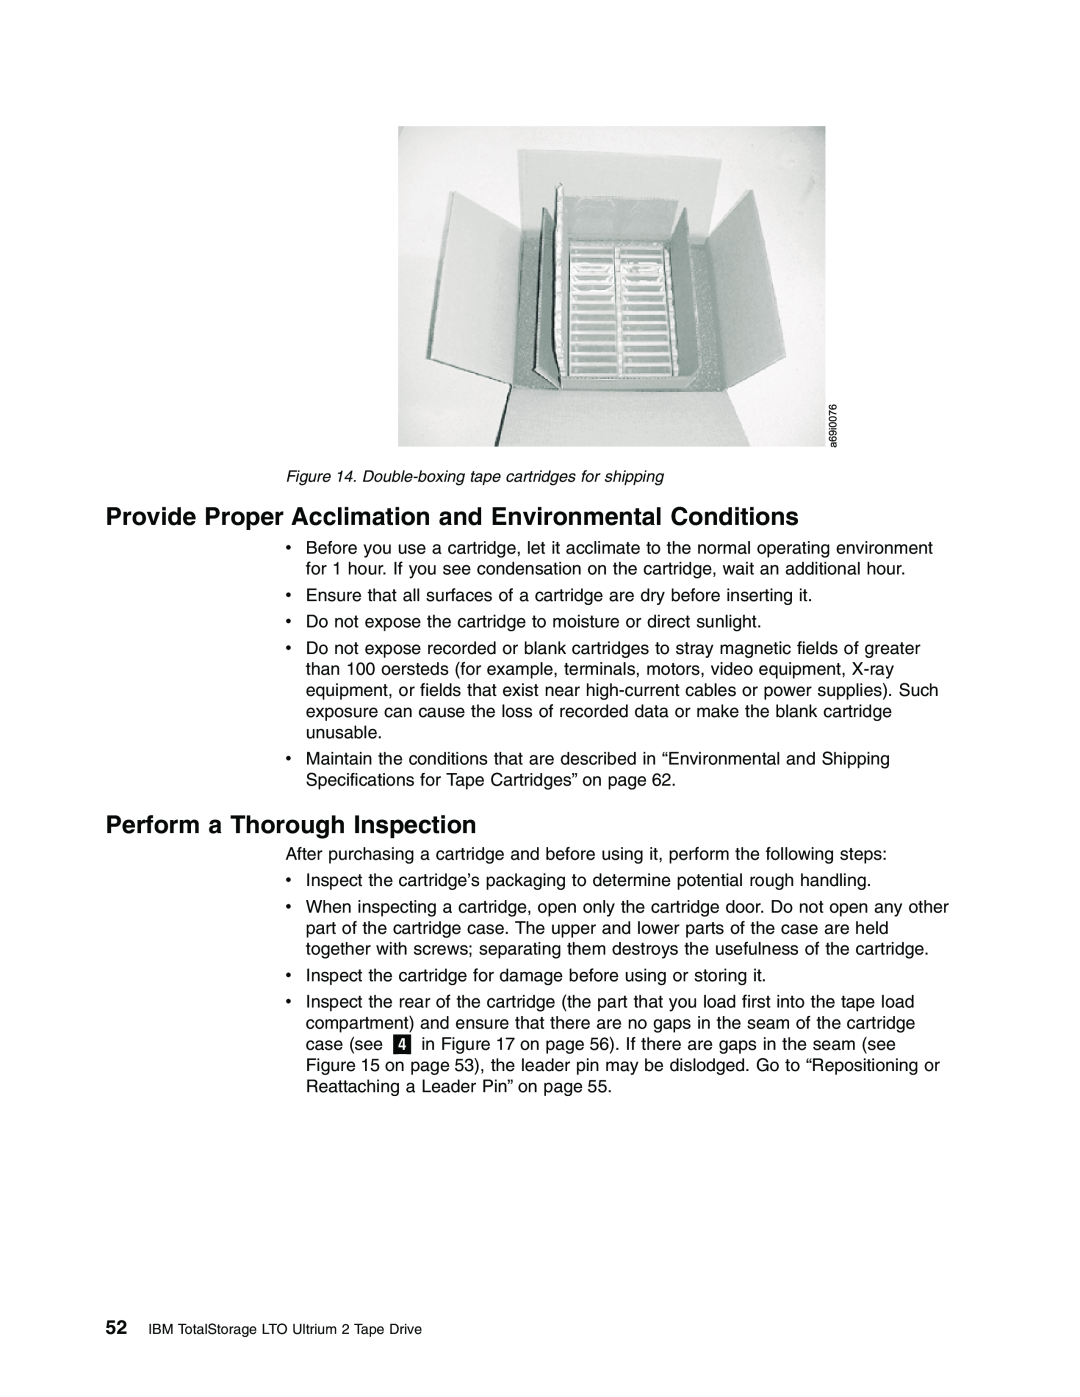 IBM T400F manual Provide Proper Acclimation and Environmental Conditions, Perform a Thorough Inspection 